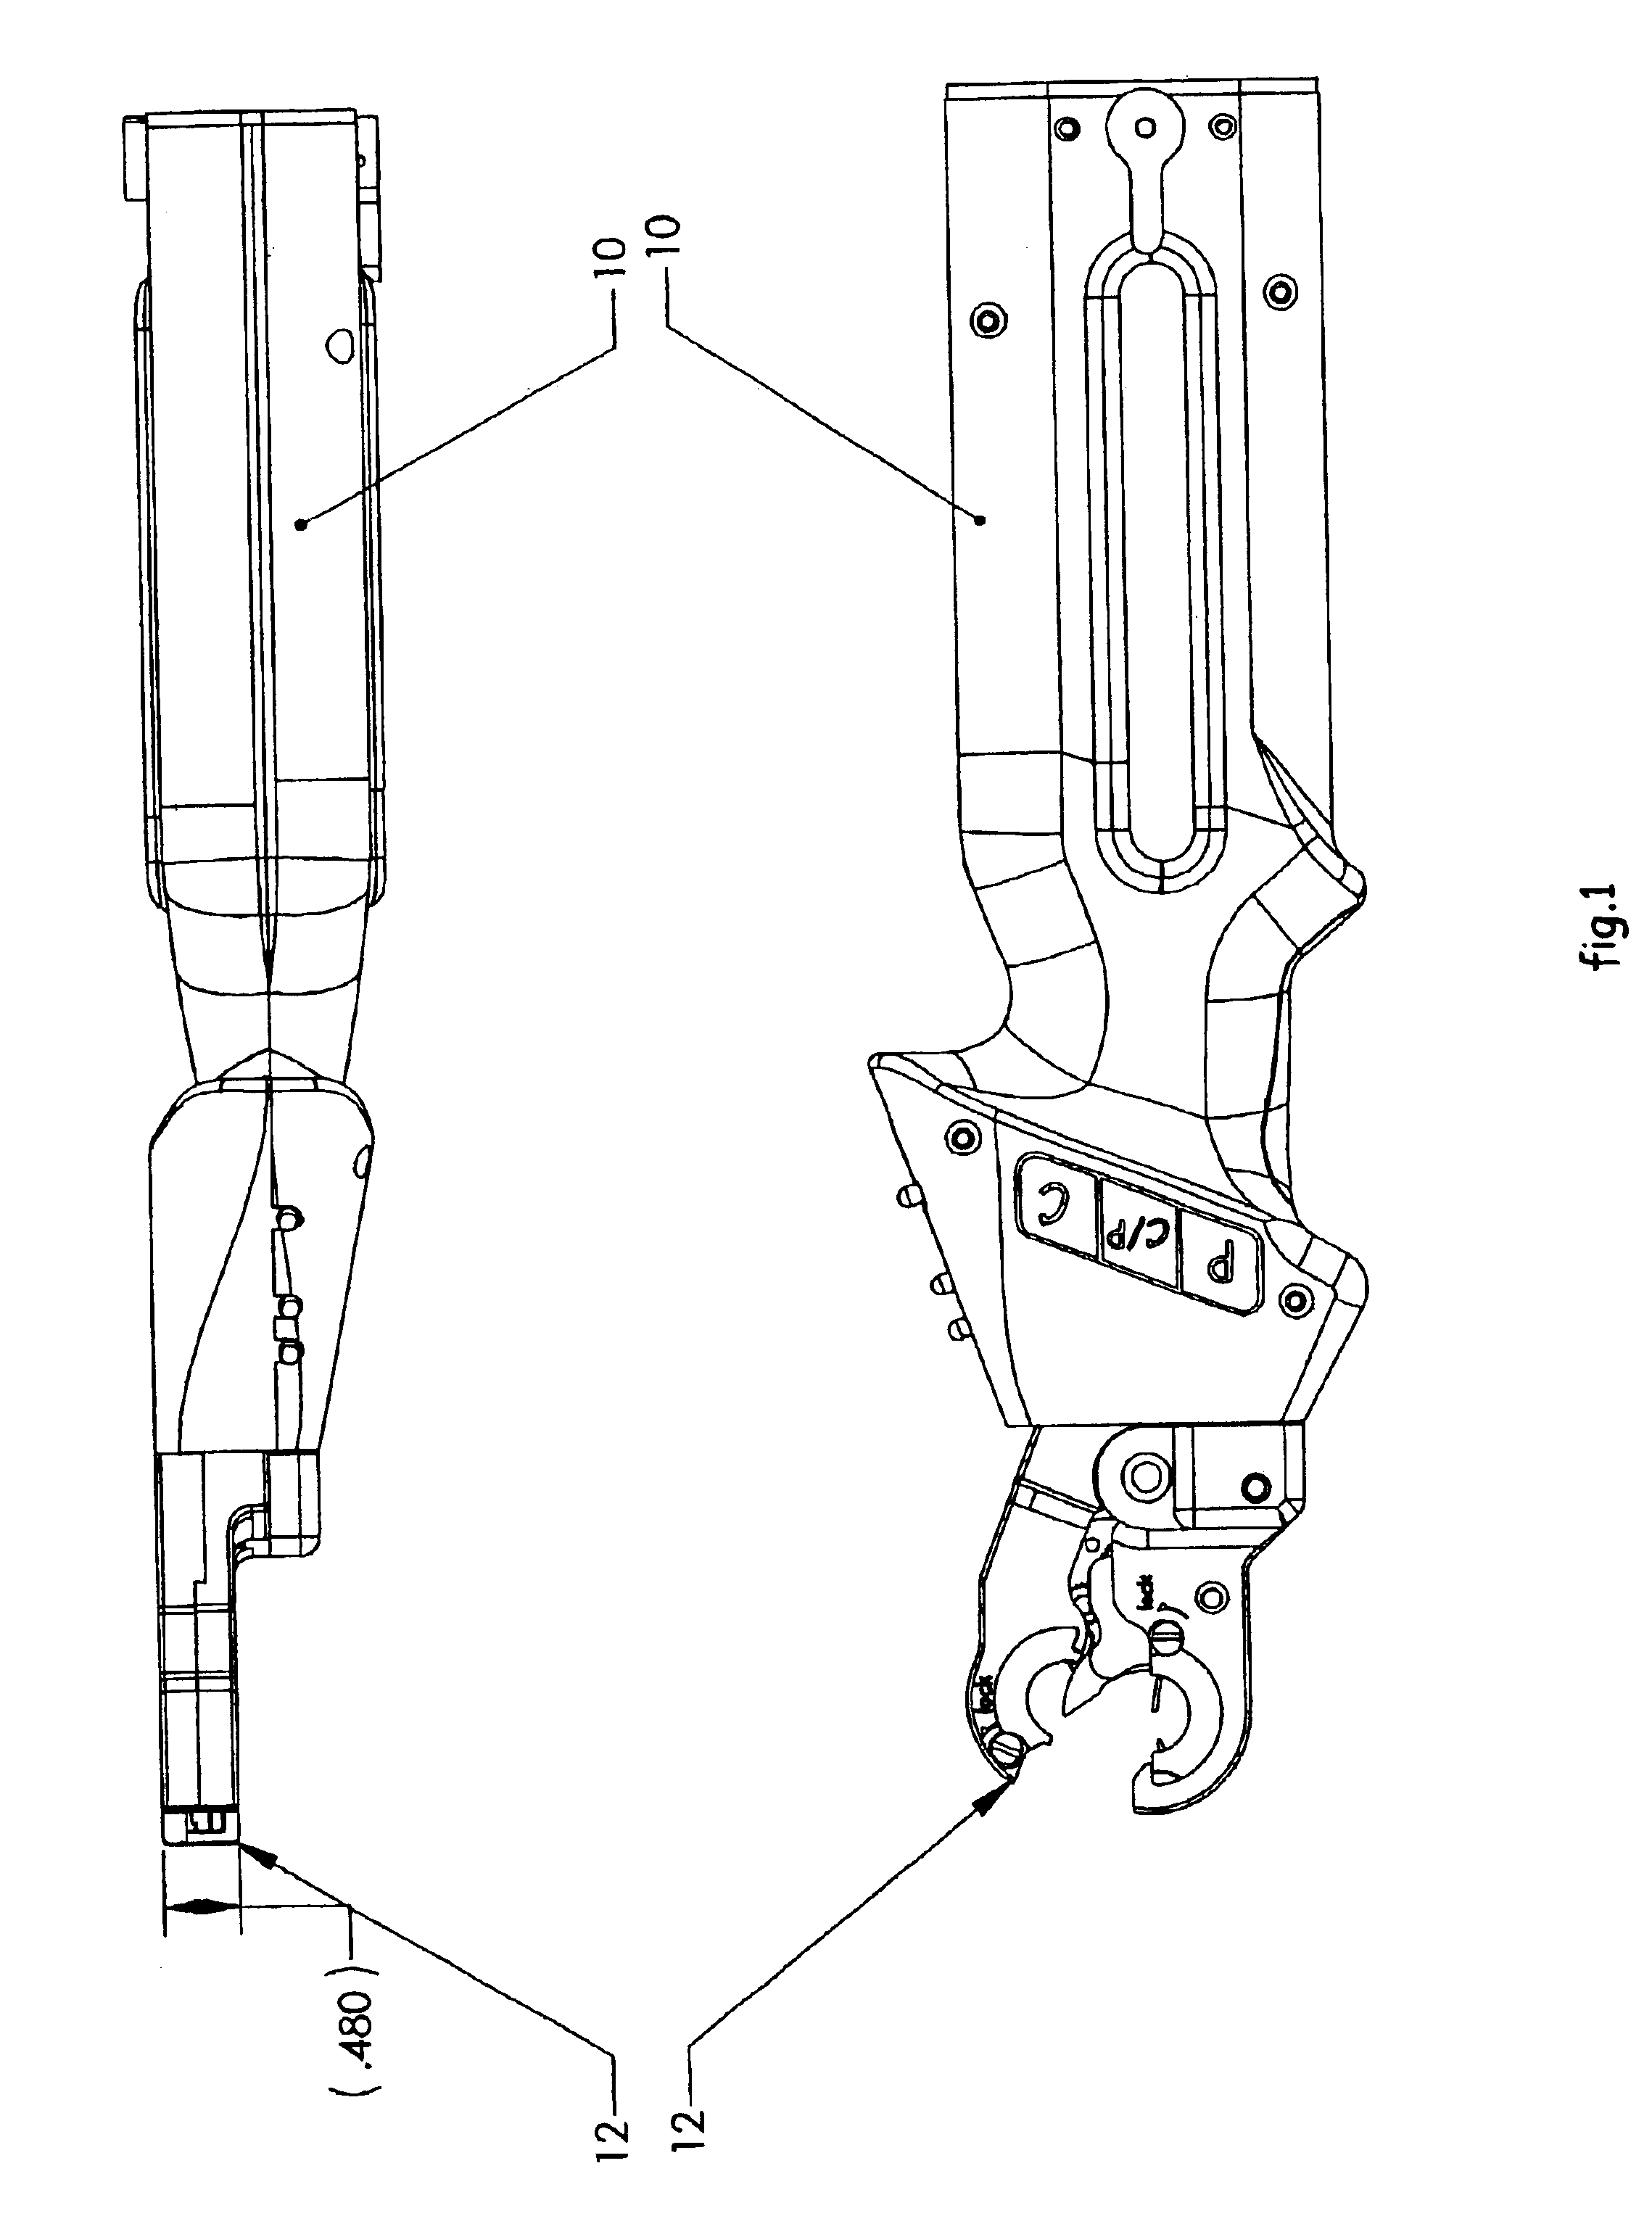 Ceramic weld insulator and metal weld gear combination for an improved micro weld head component of an orbital tube welding apparatus